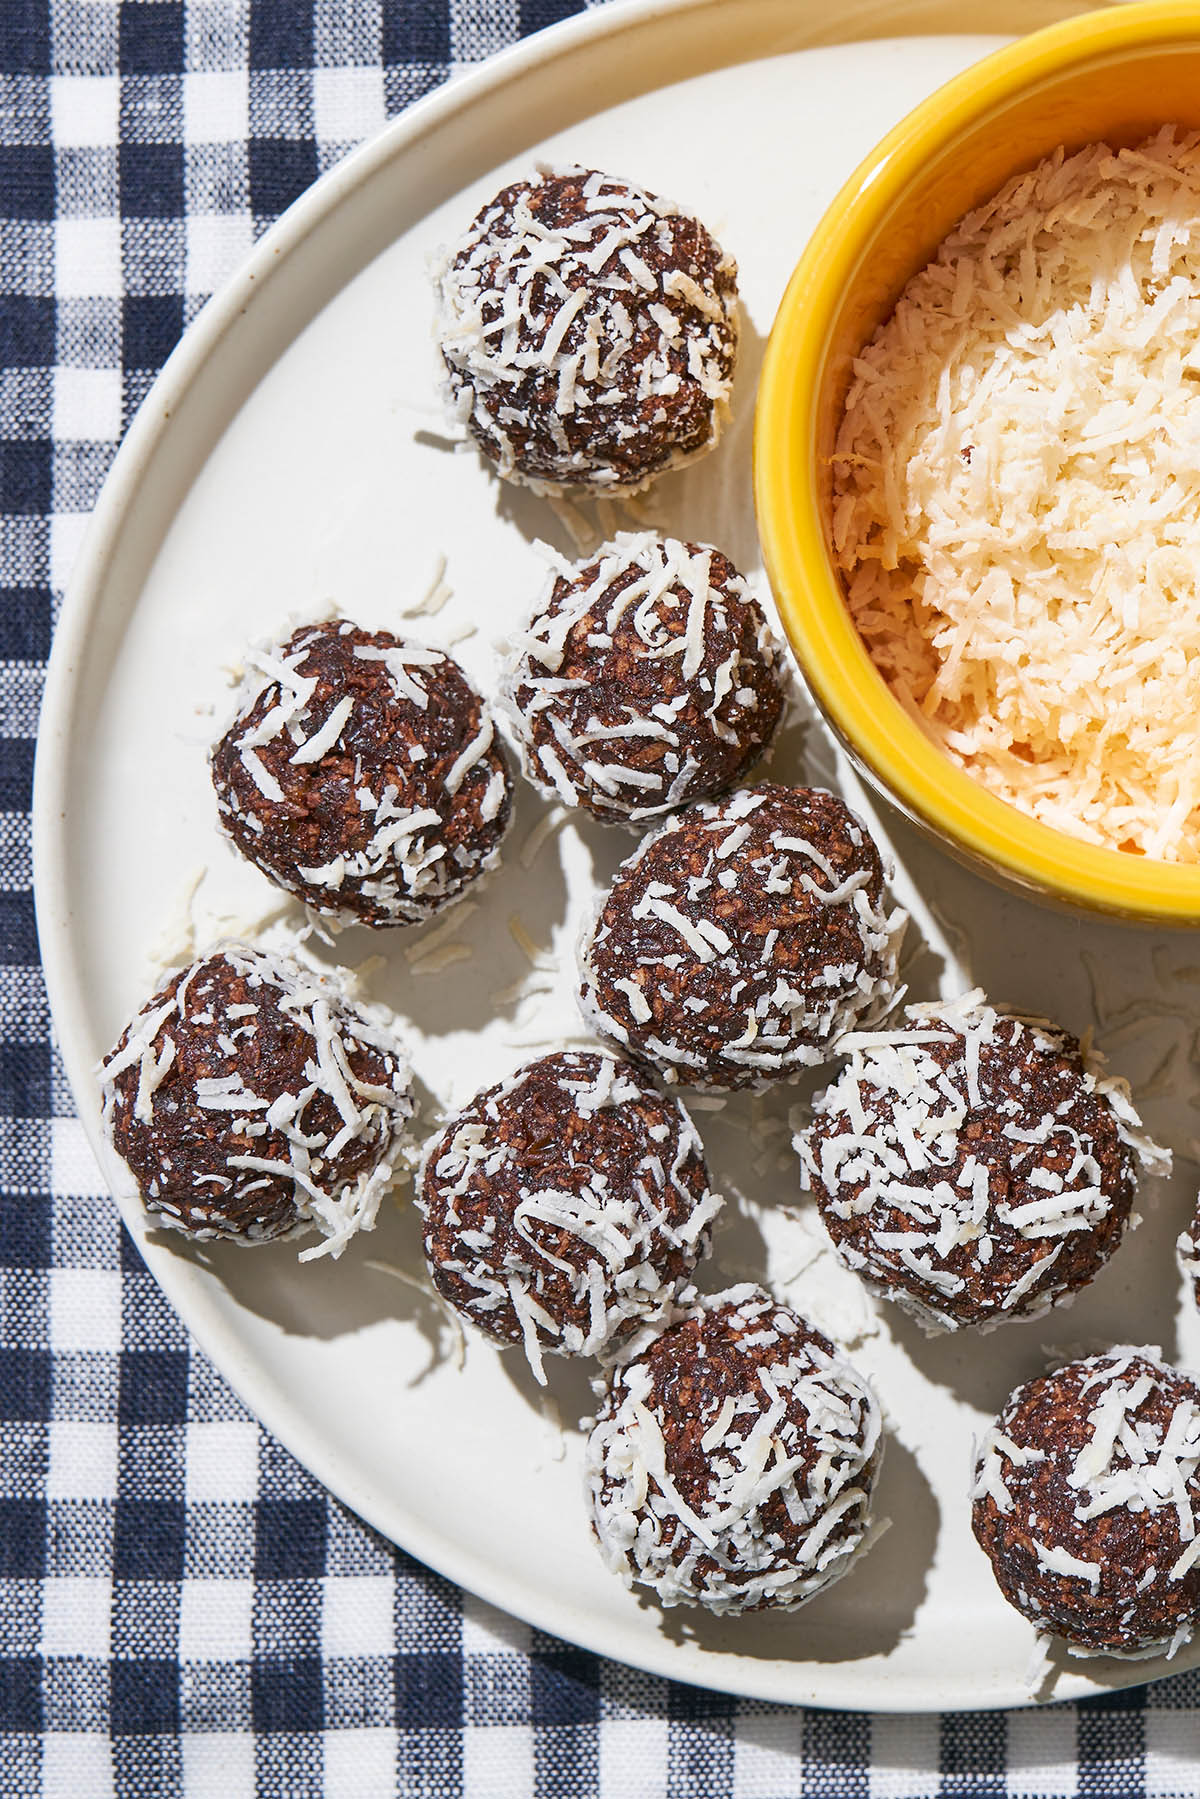 Close up of coconut-coated chocolate balls on a plate.